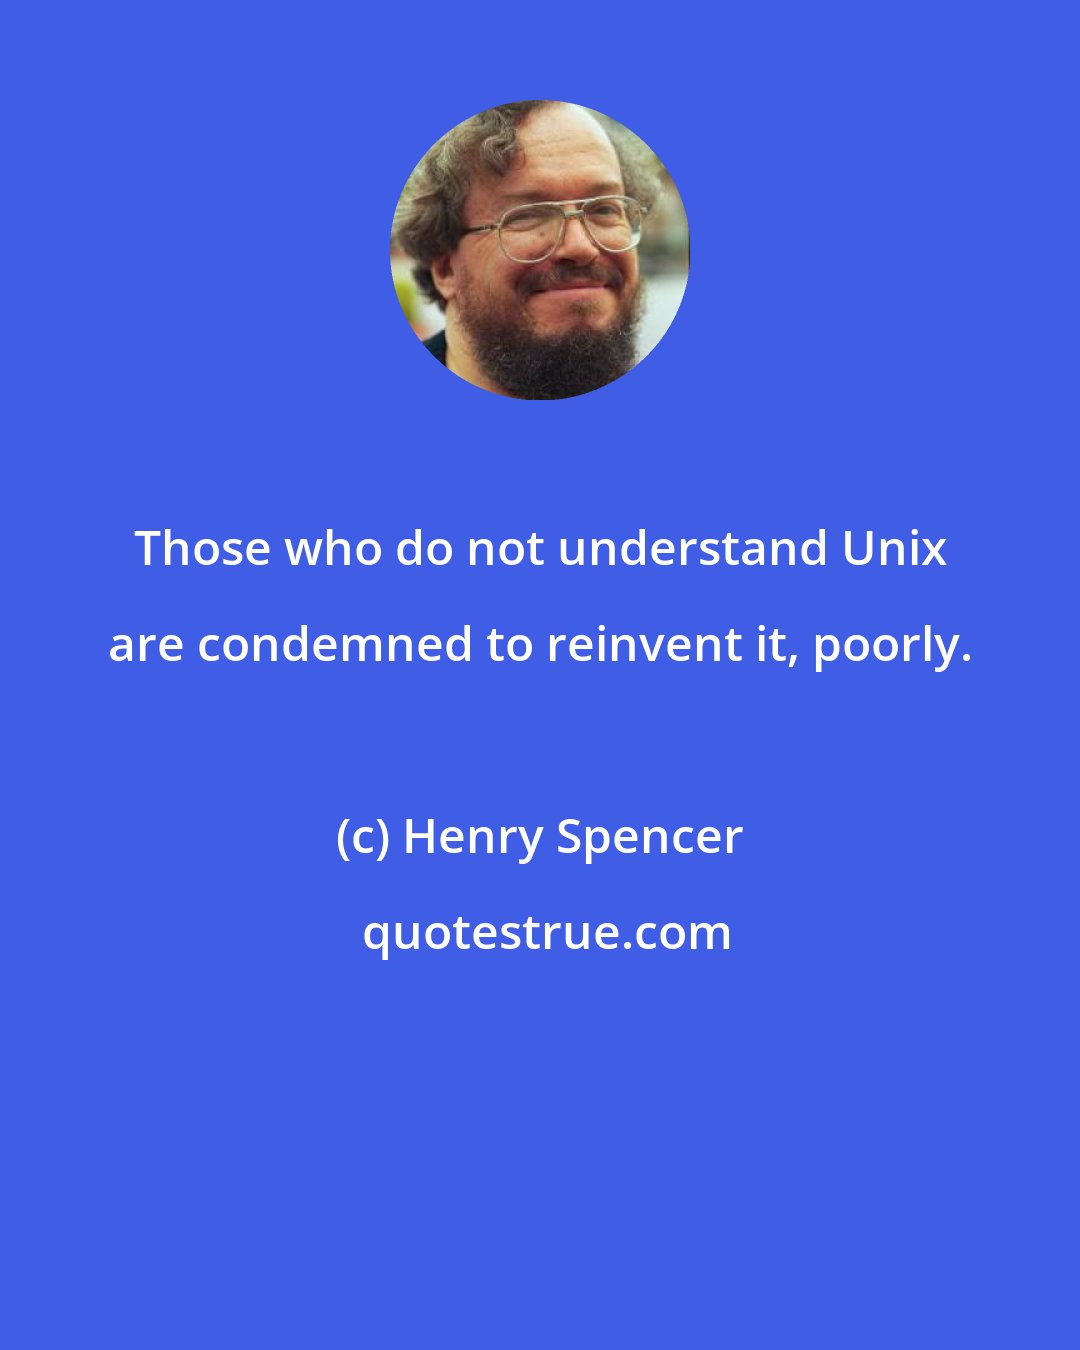 Henry Spencer: Those who do not understand Unix are condemned to reinvent it, poorly.